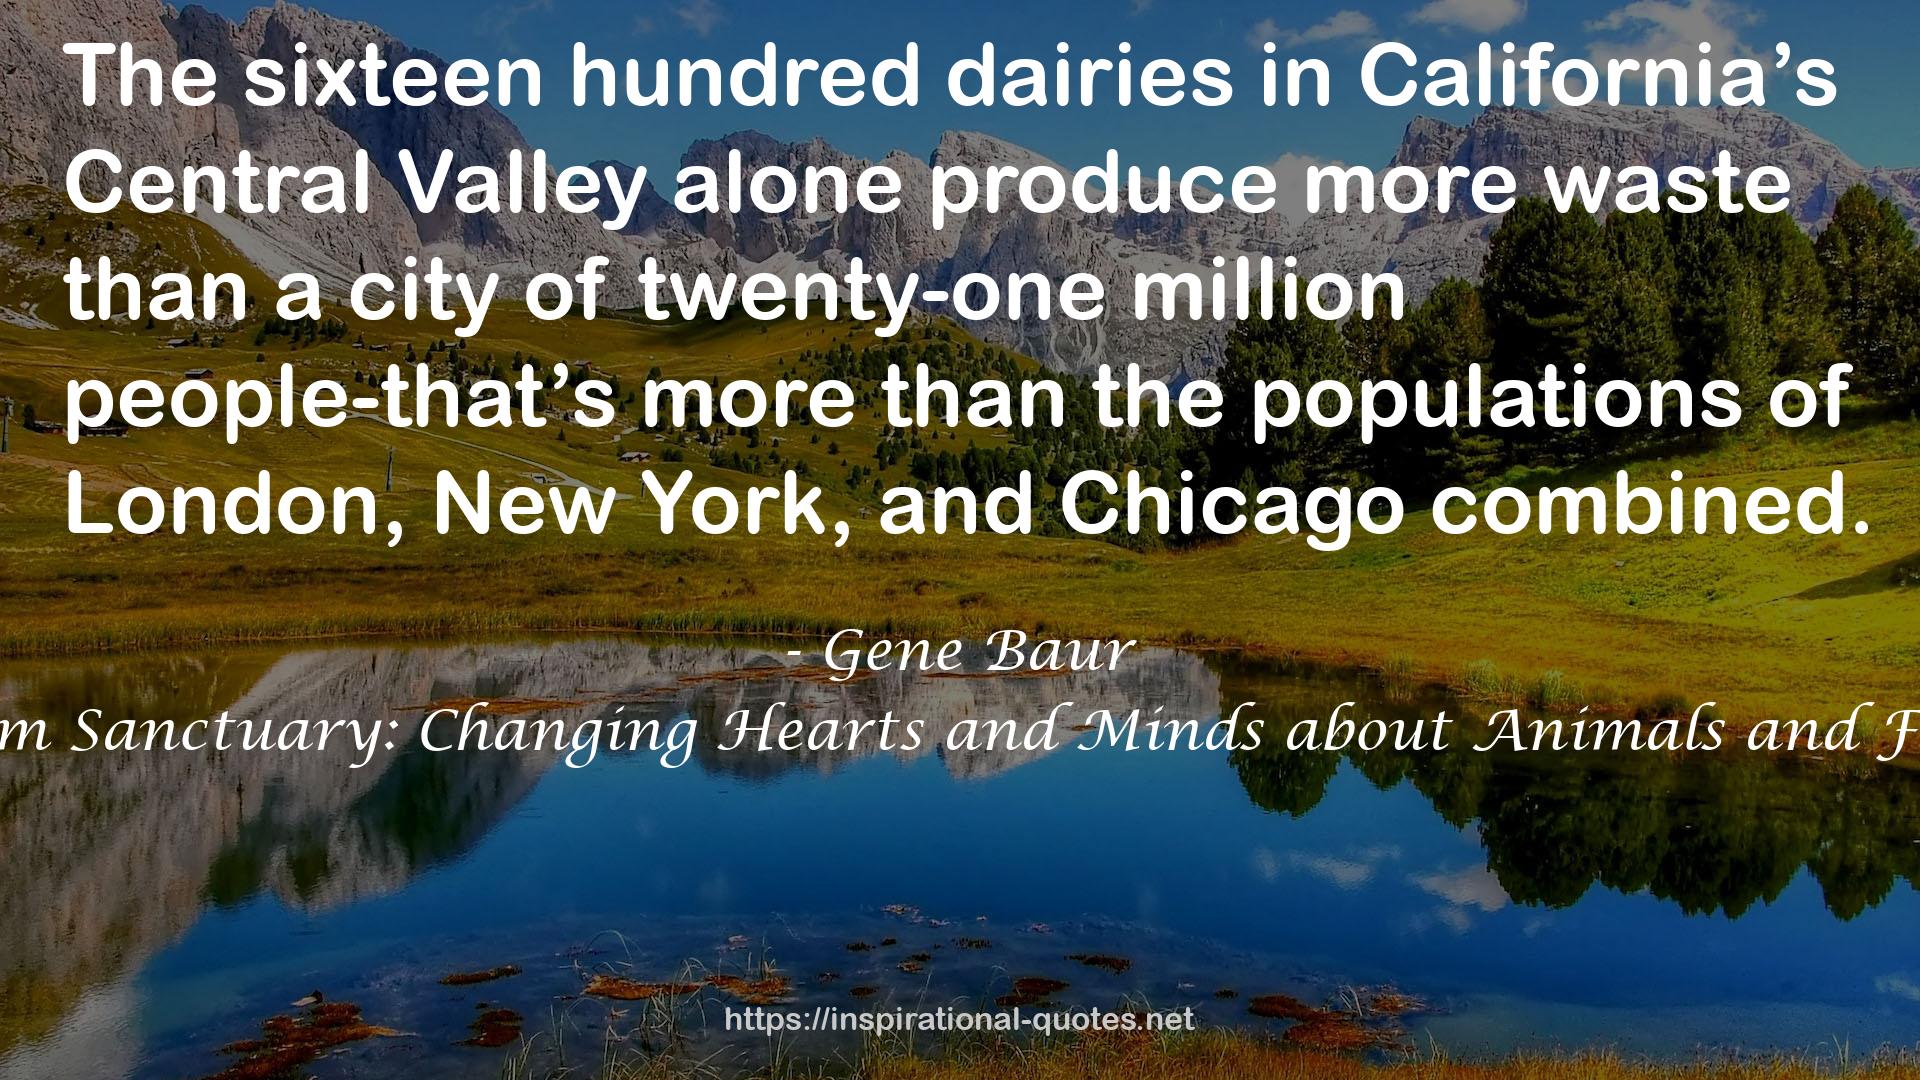 Farm Sanctuary: Changing Hearts and Minds about Animals and Food QUOTES